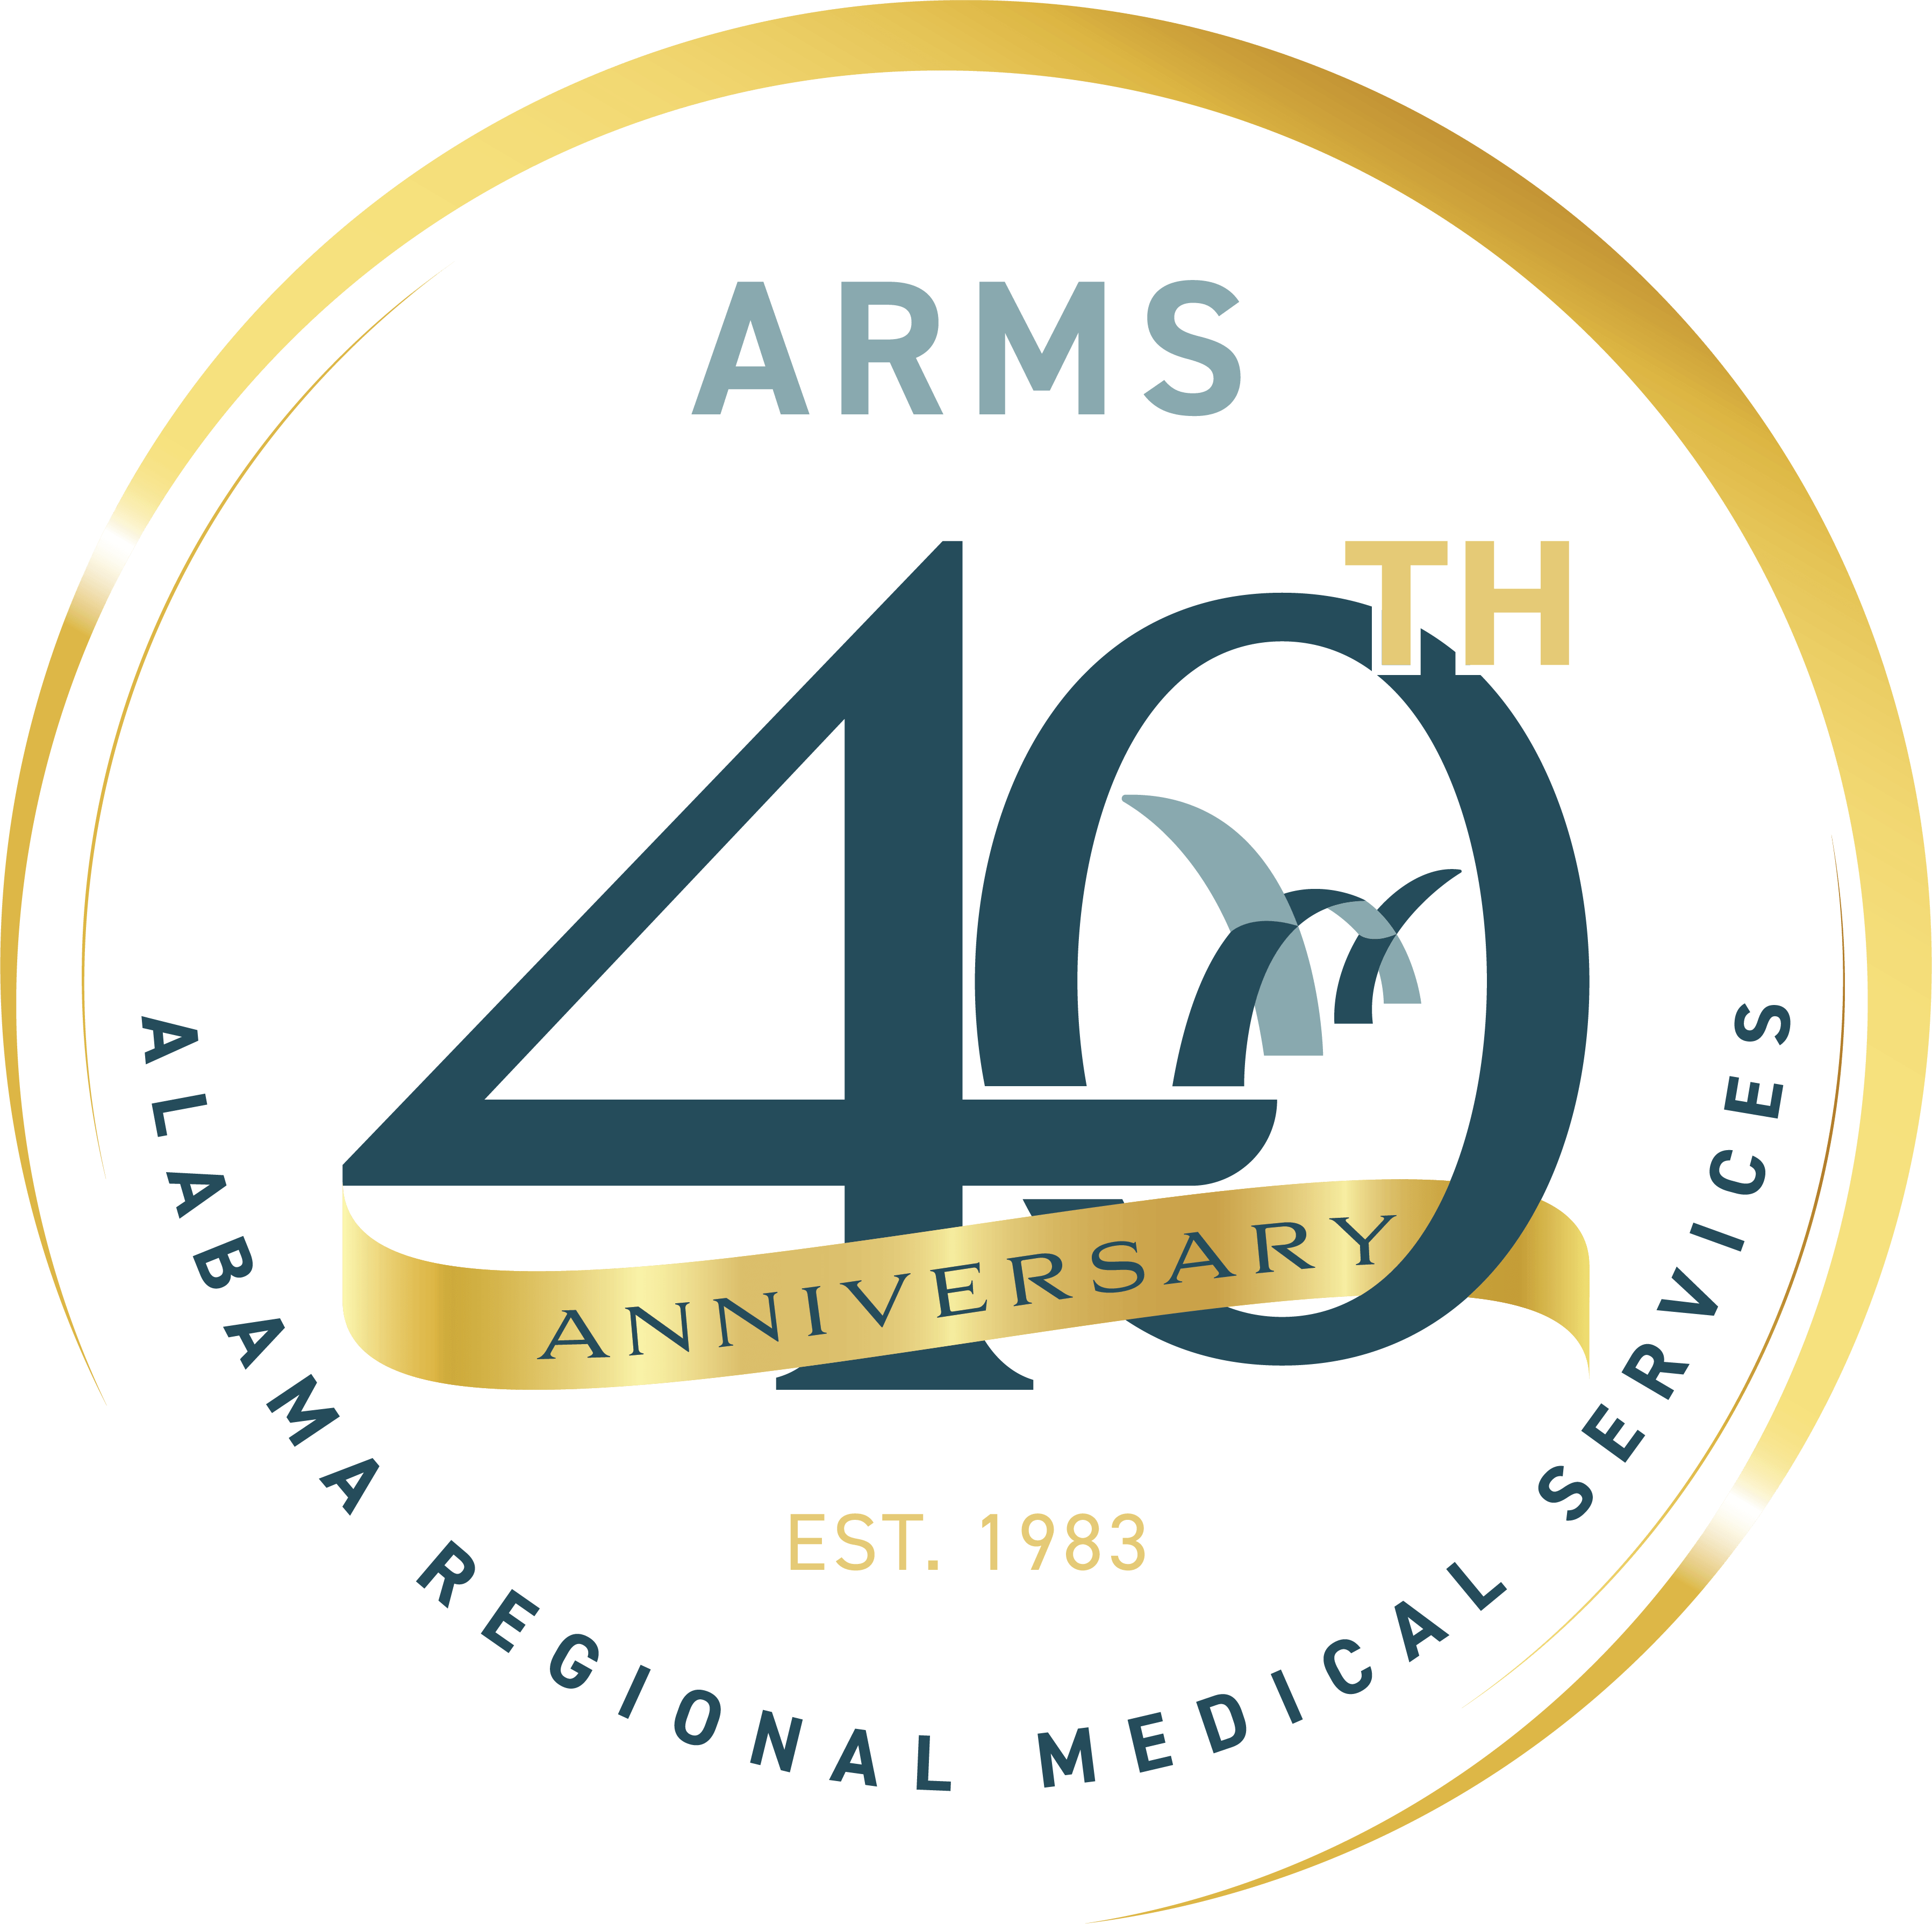 ARMS Healthcare